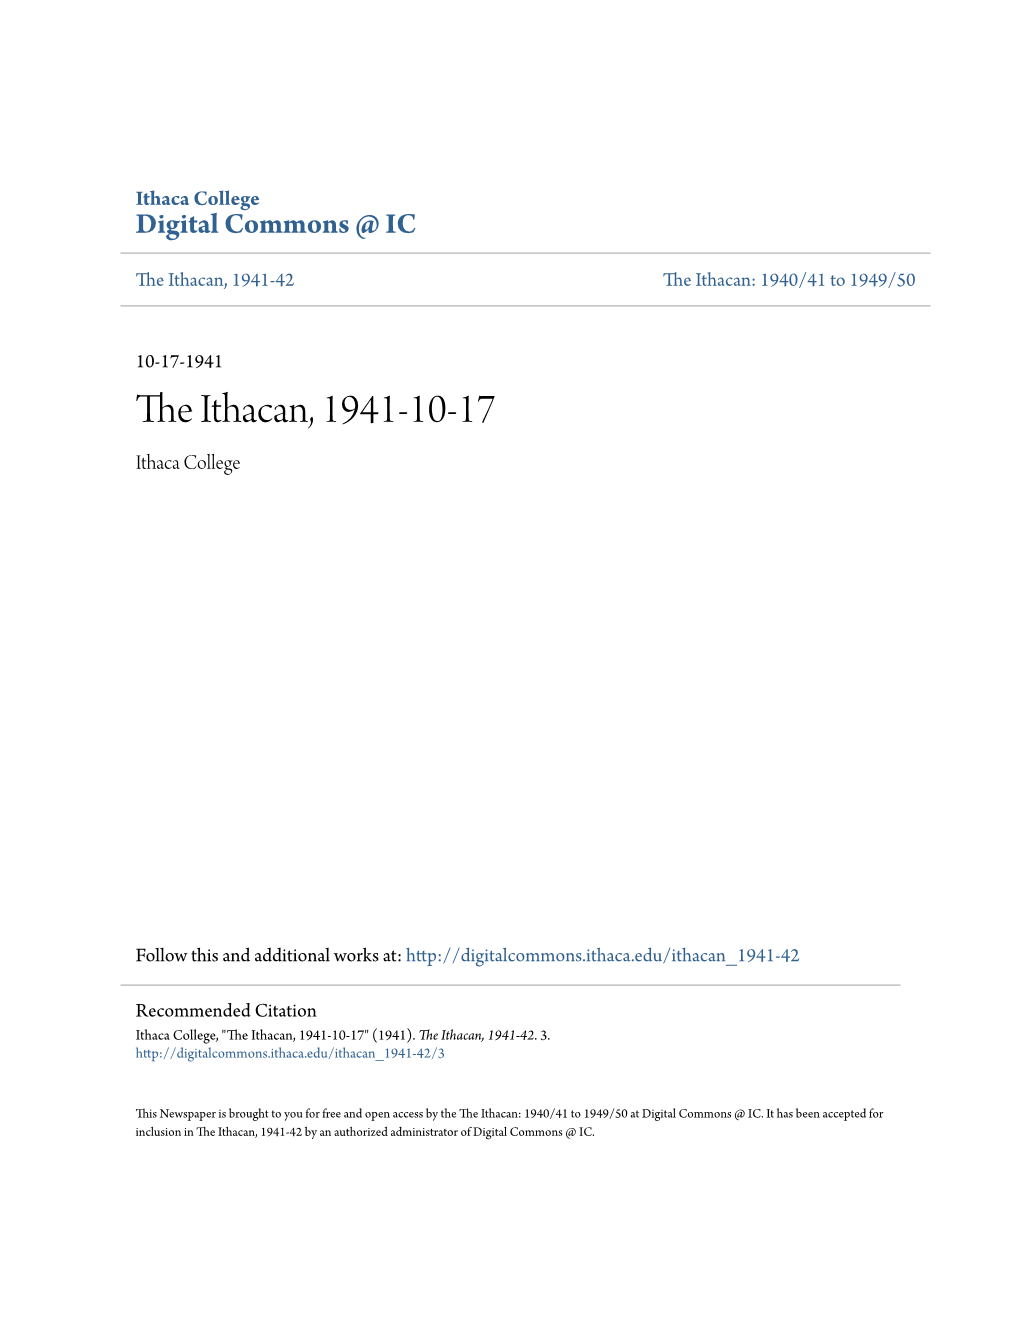 The Ithacan, 1941-10-17